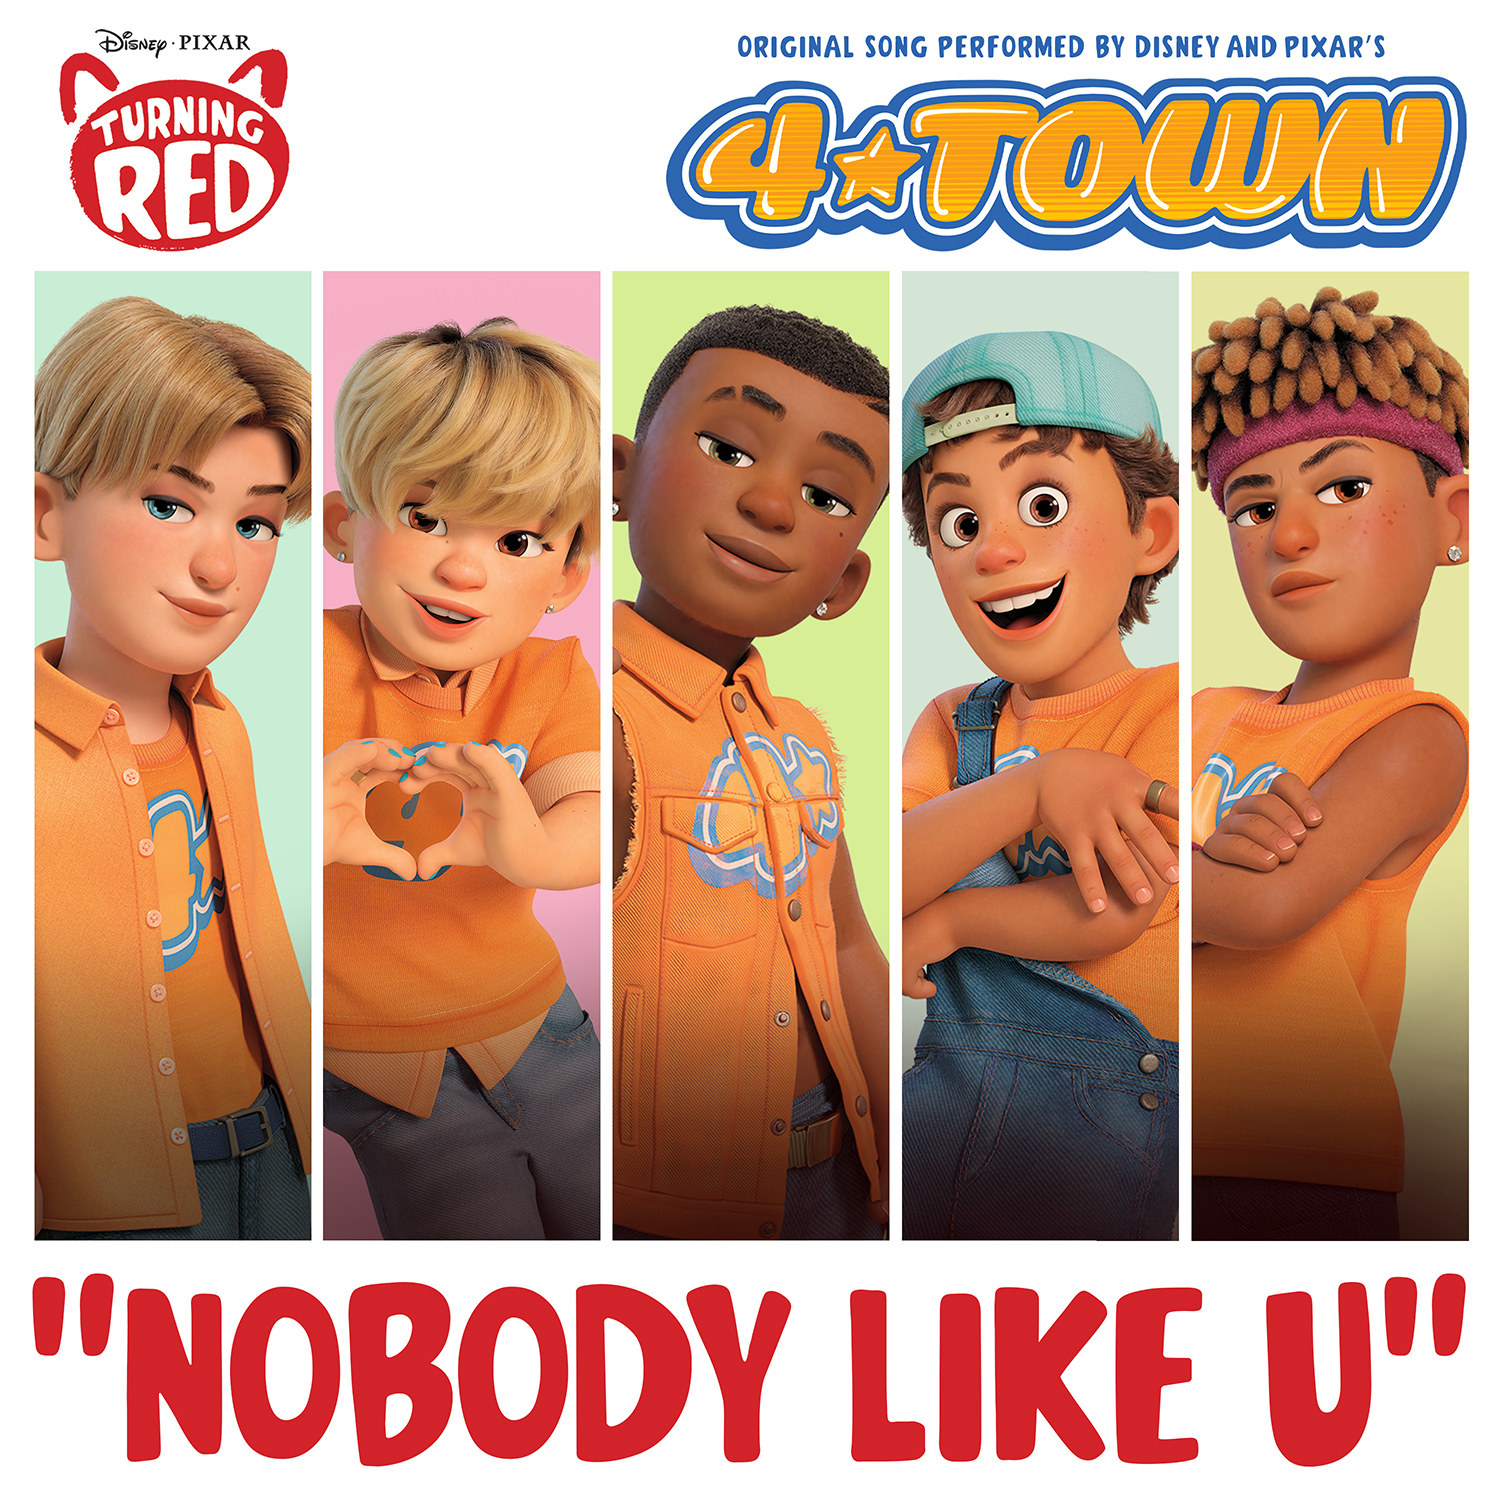 The members of 4*Town with the song title &quot;Nobody Like U&quot; under them